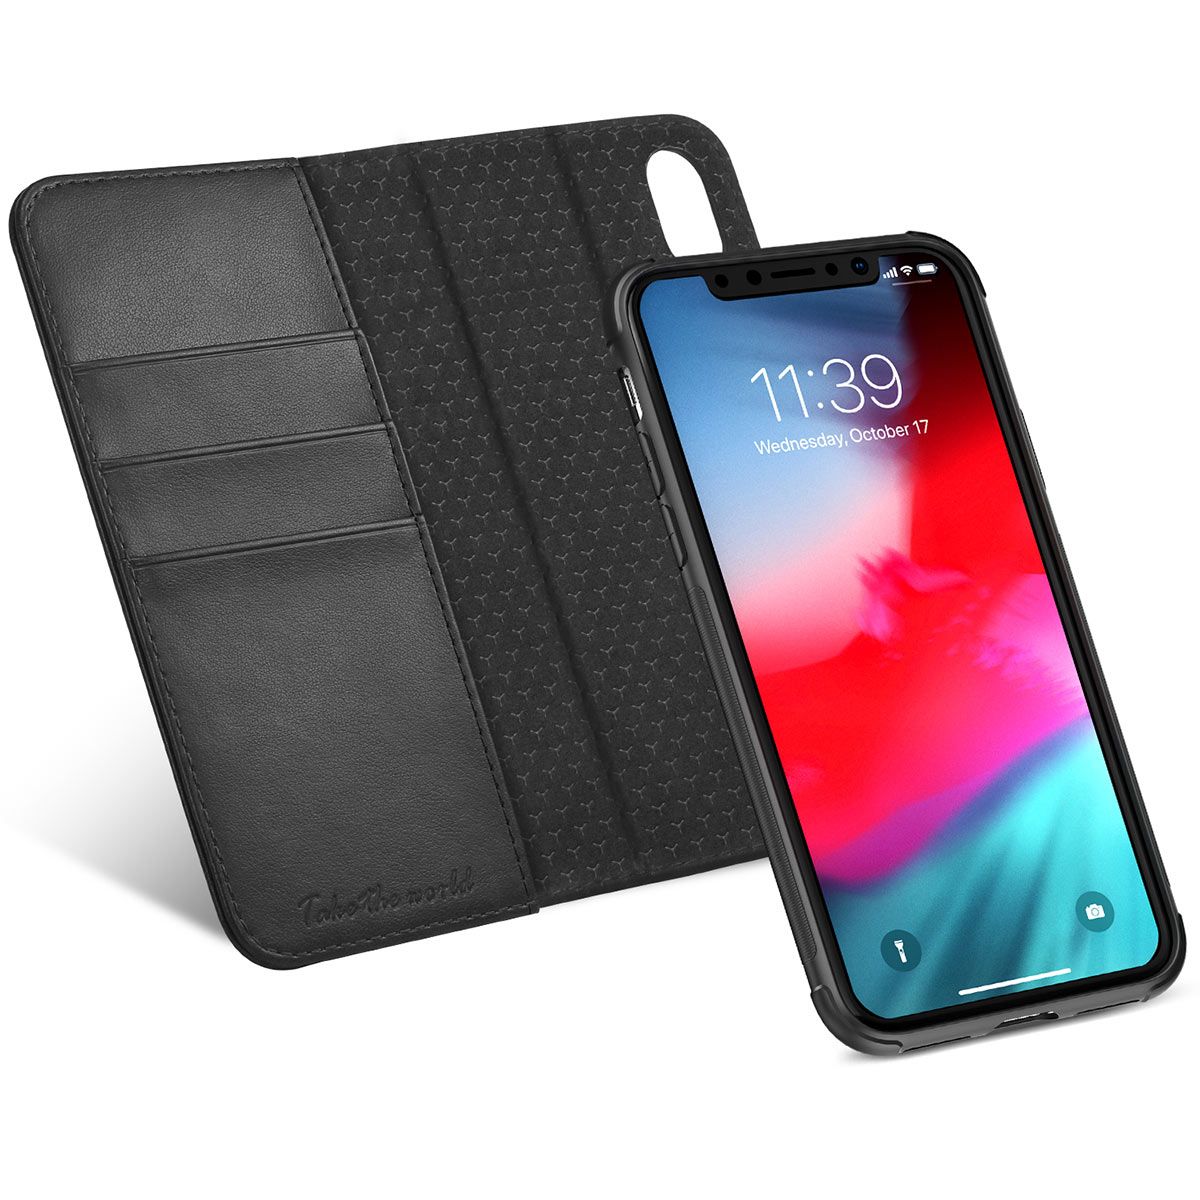 TUCCH iPhone XR Leather Wallet Case, iPhone XR Detachable Case 2IN1, Folio / Flip Cover with ...